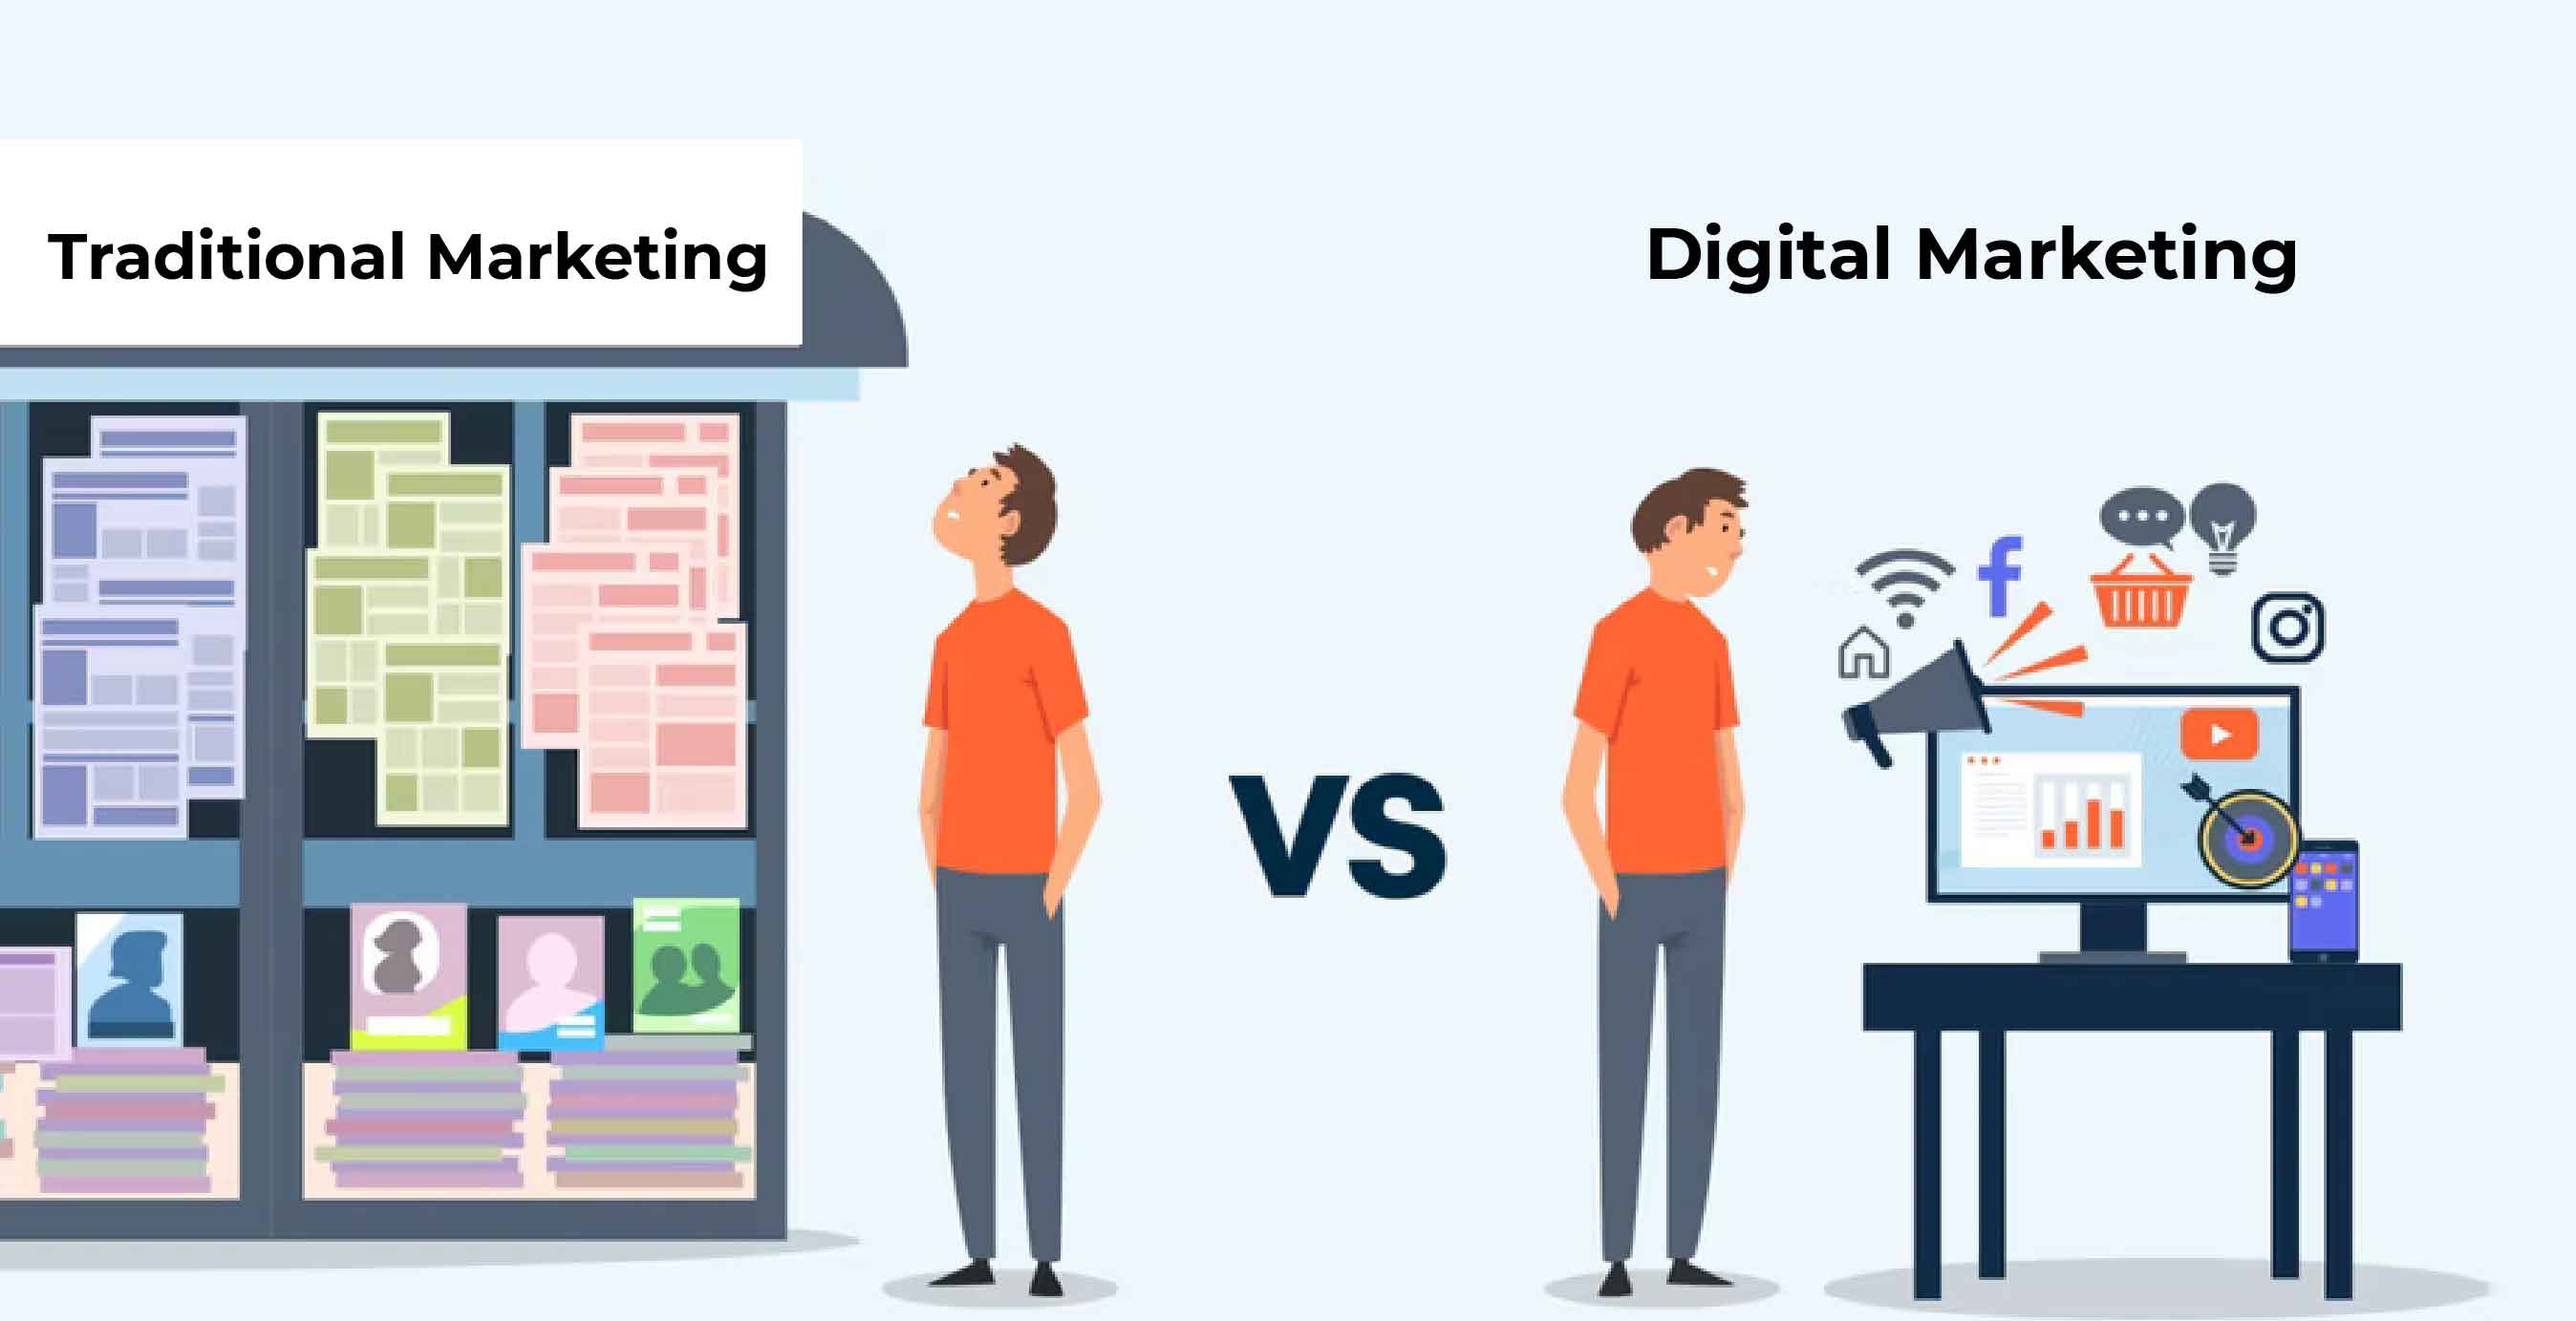 Can digital marketing replace traditional marketing?